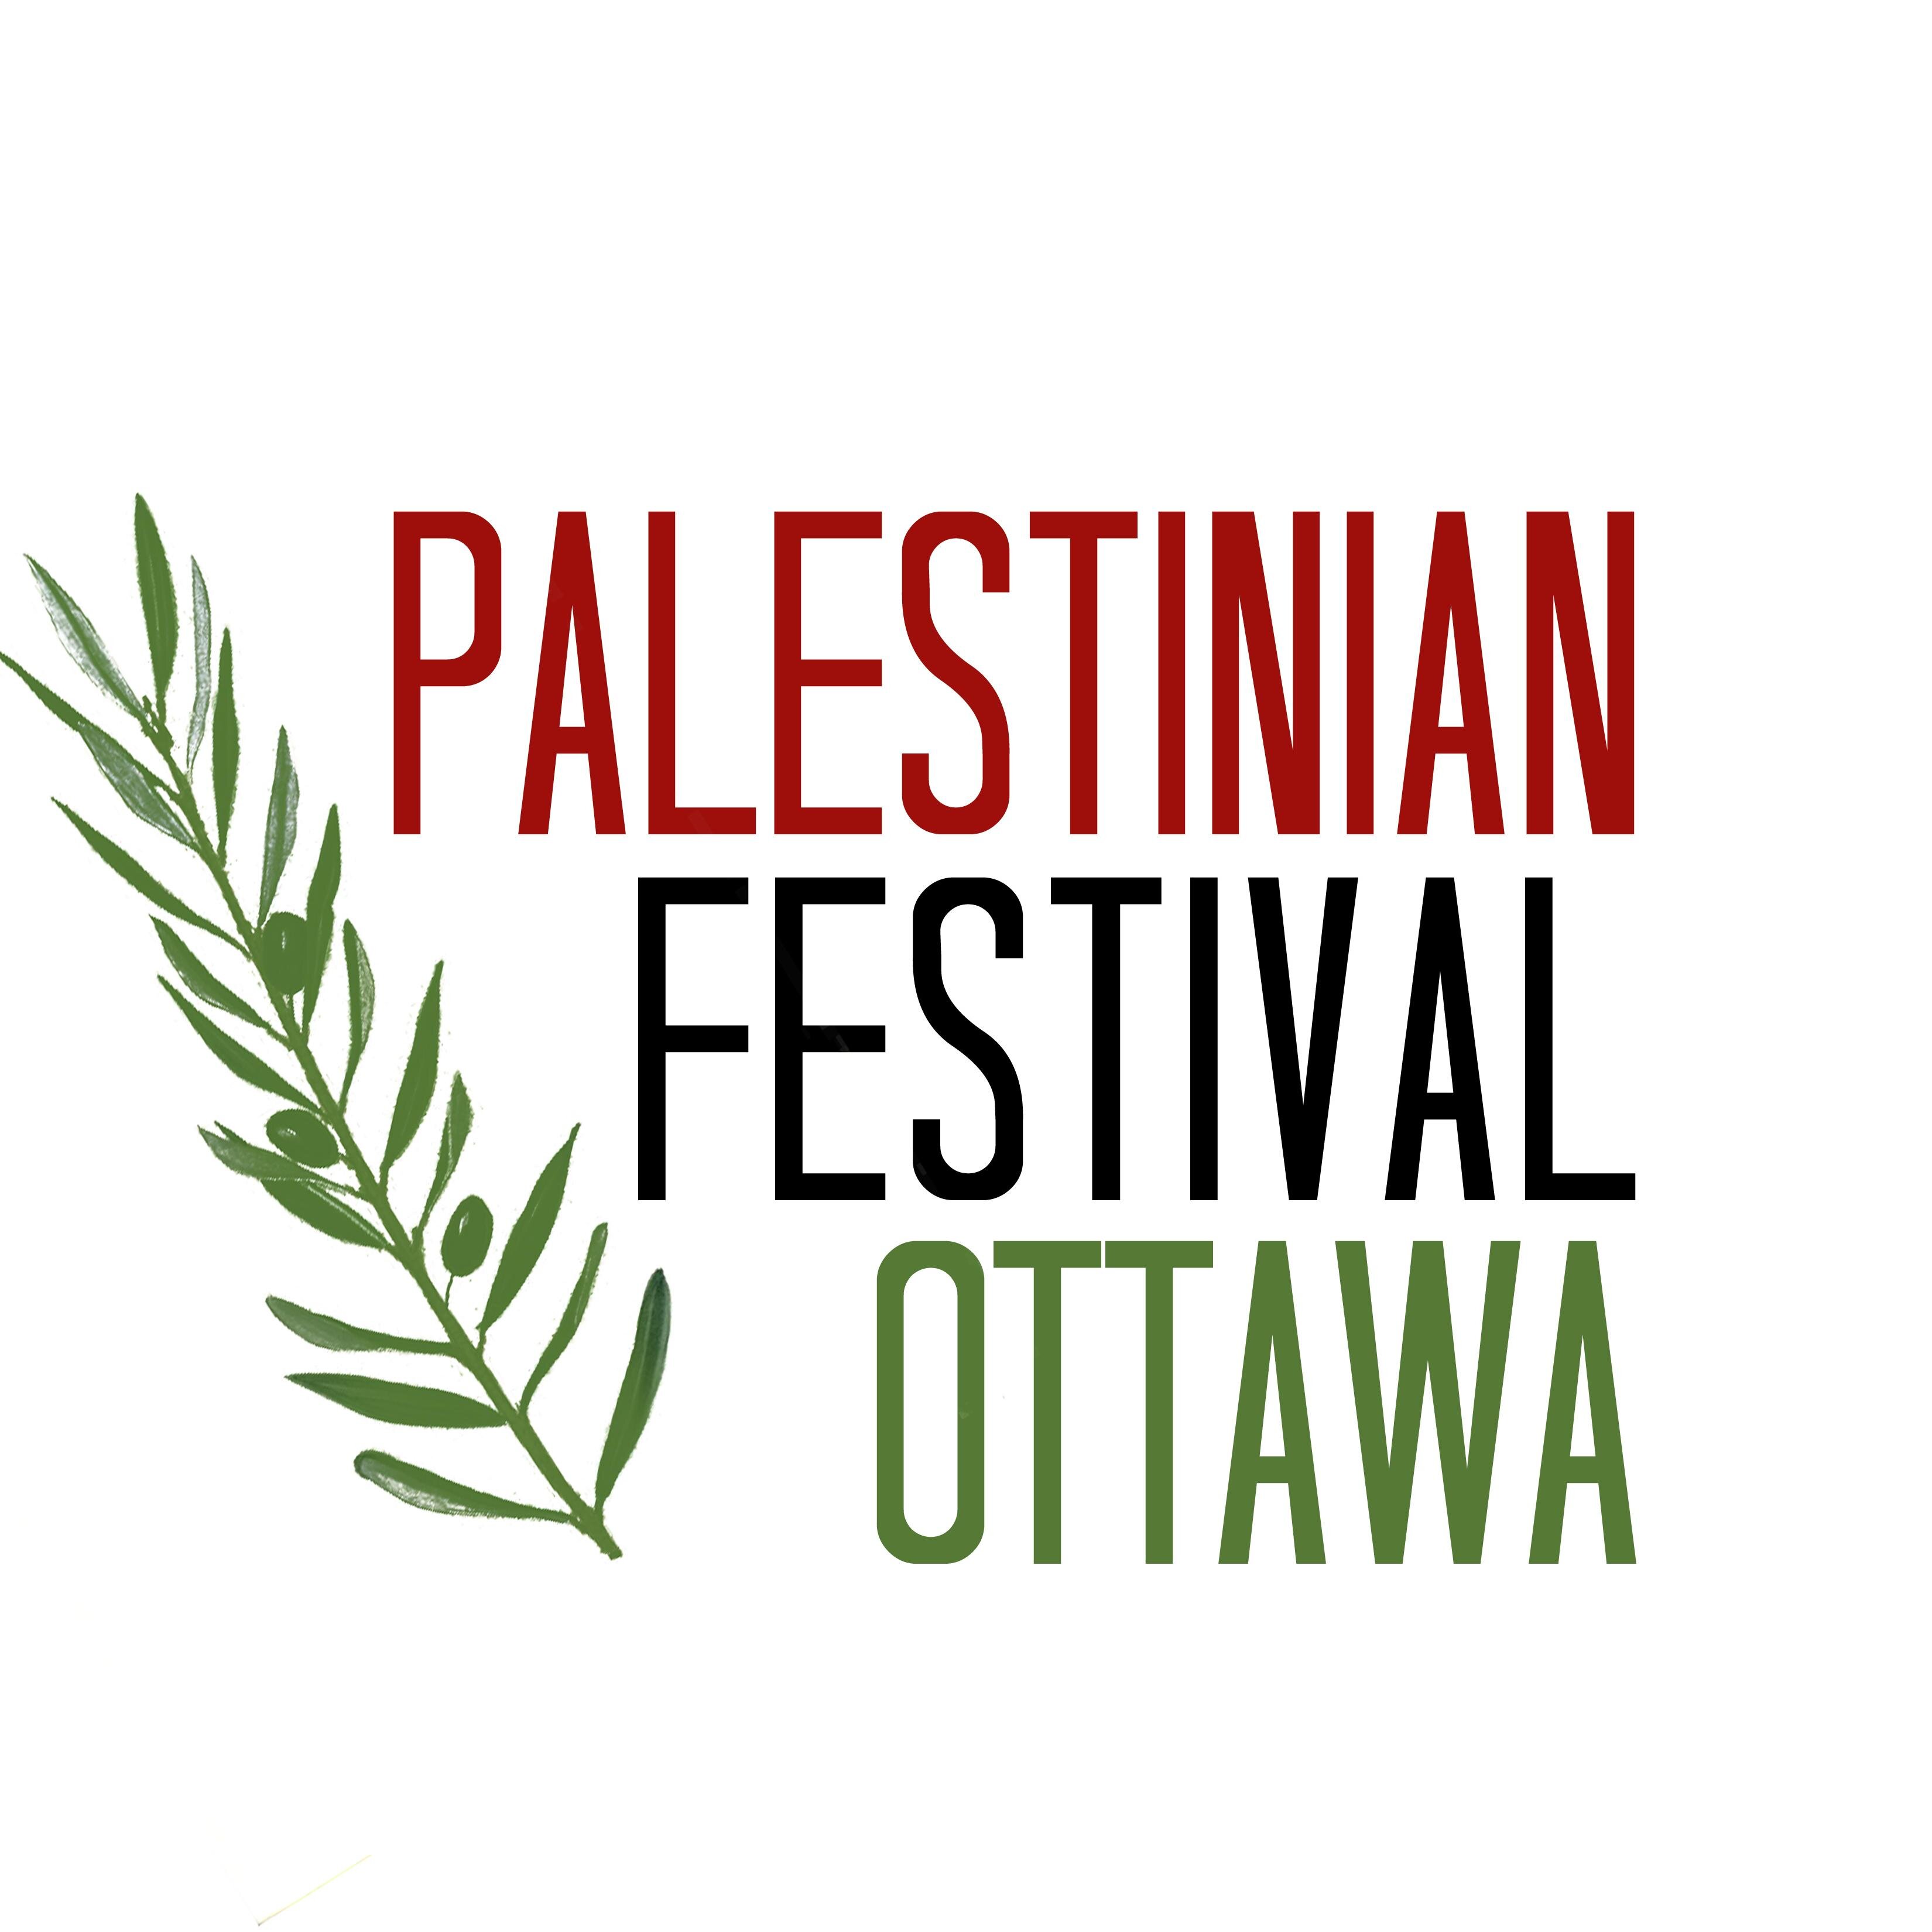 Ottawa's Palestinian Festival! We invite you to celebrate together our culture. Updates About the Festival will be posted regularly